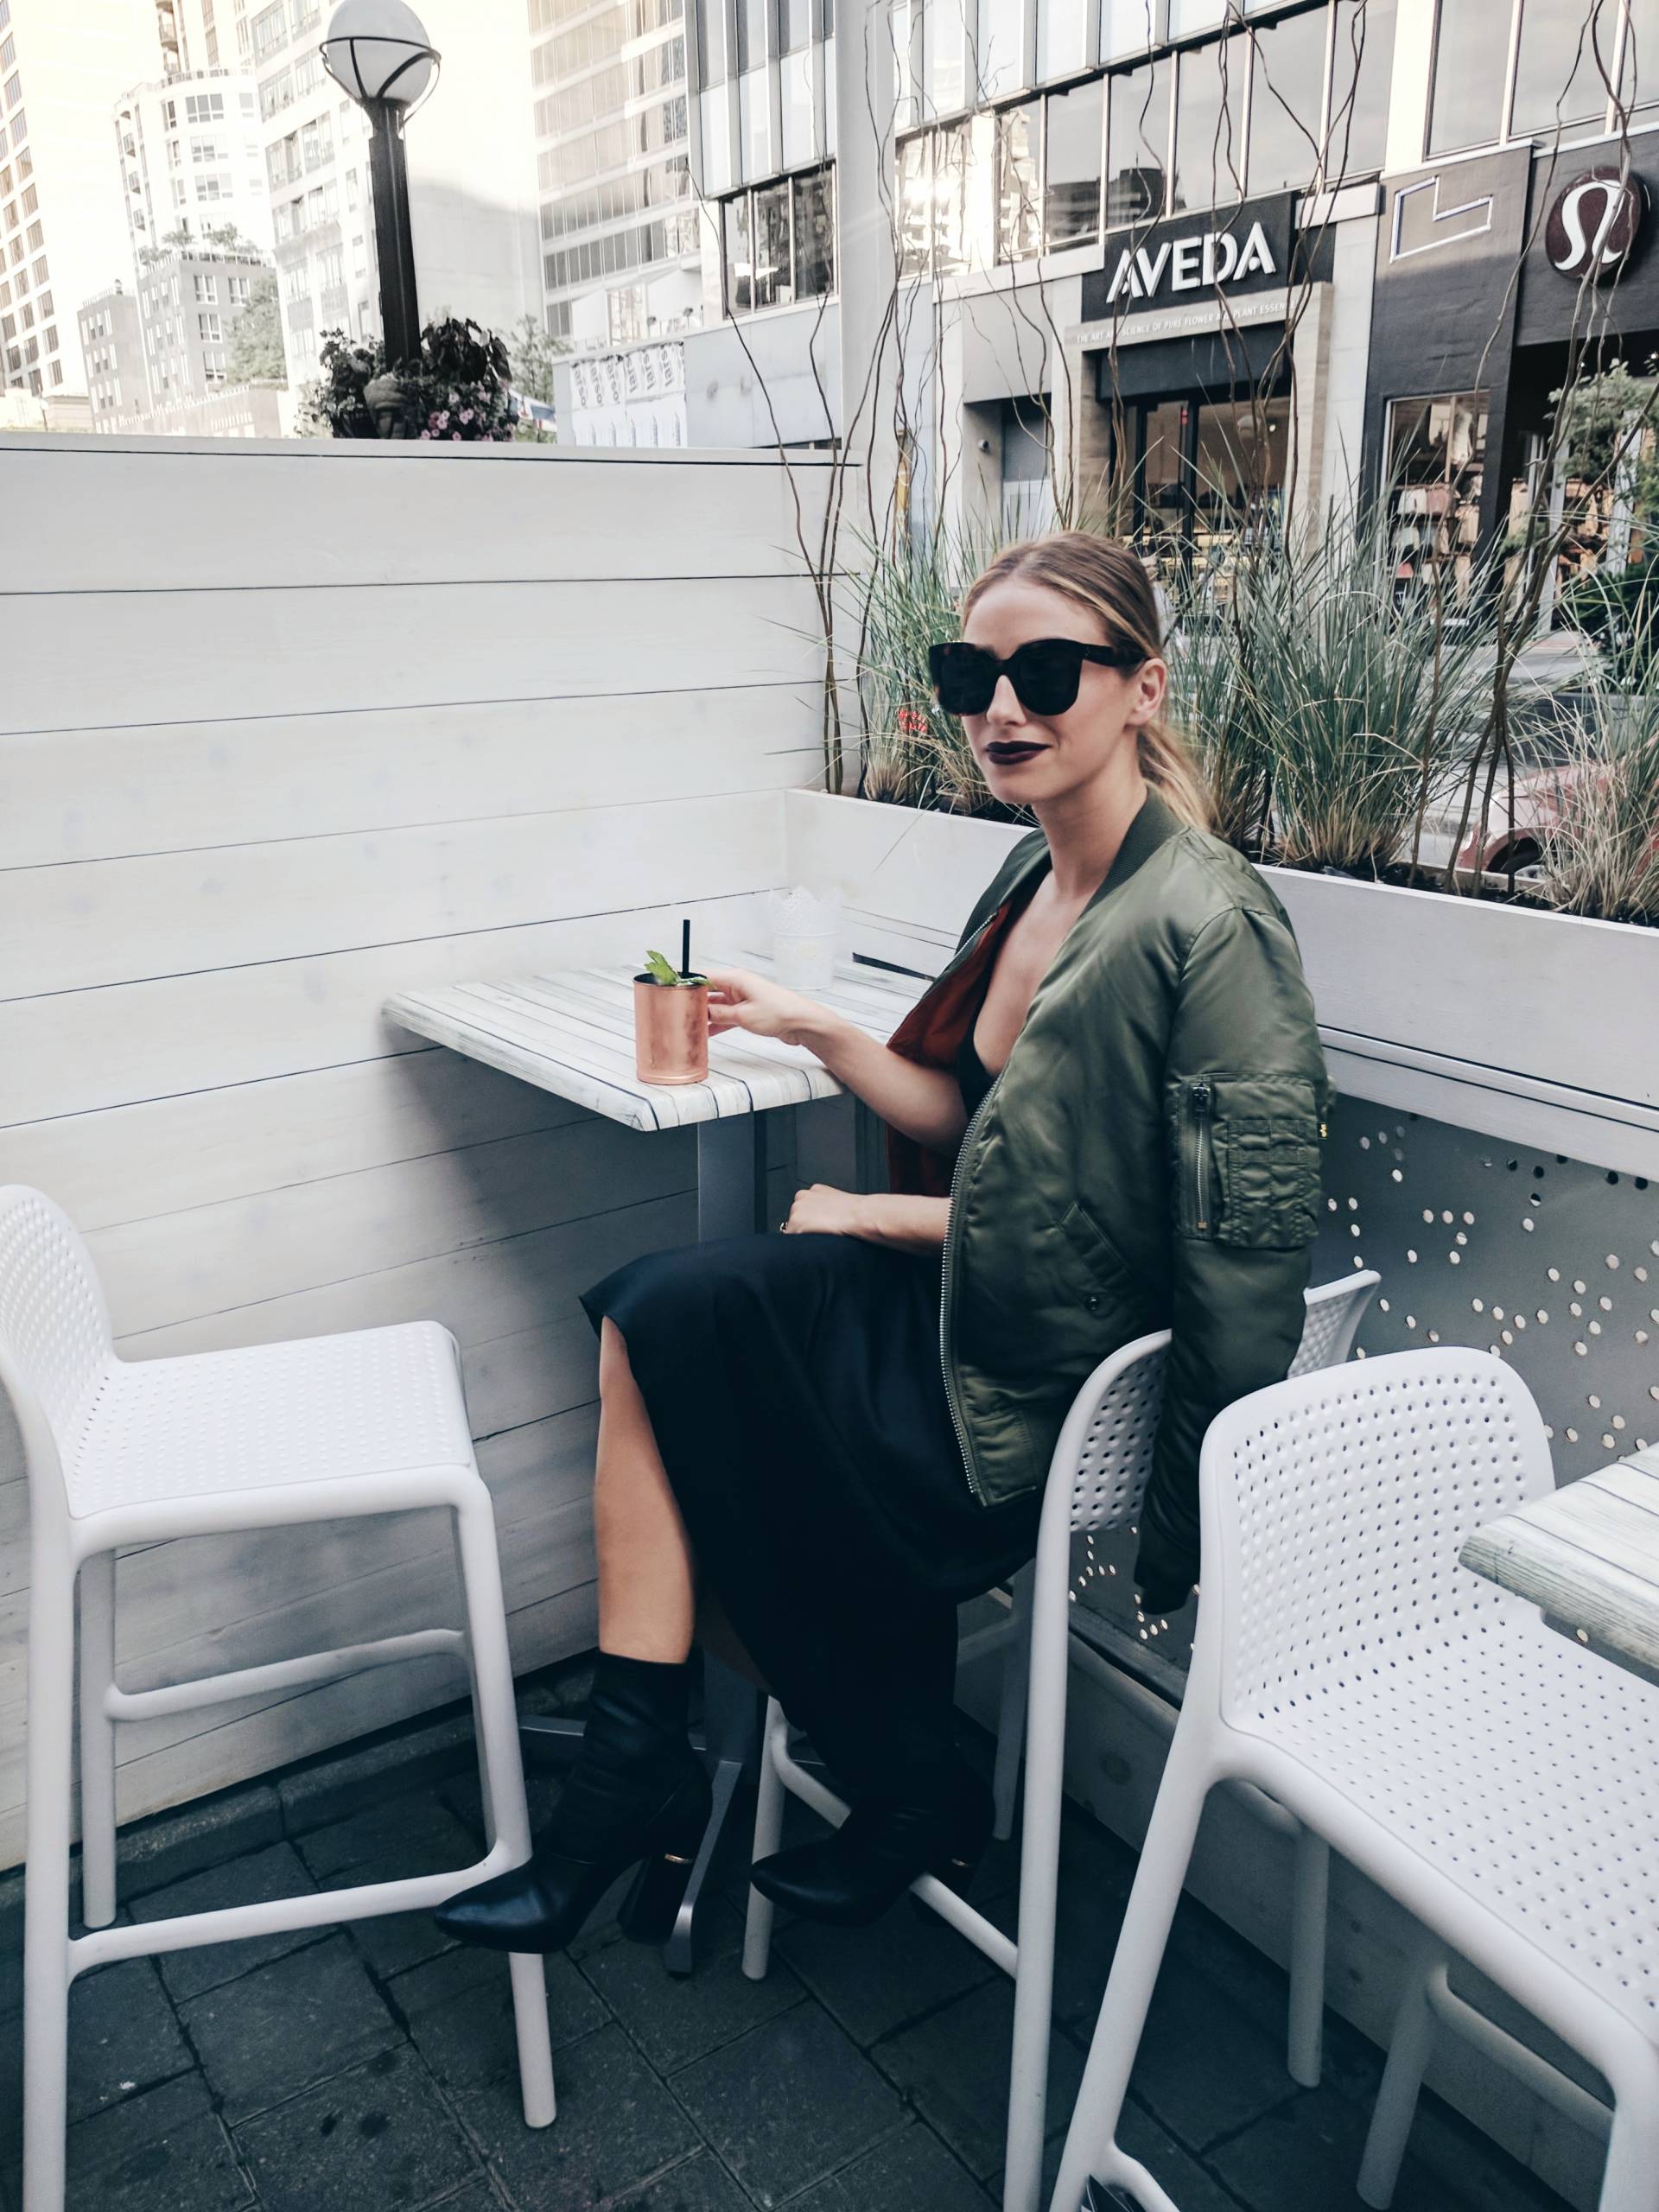 how to style bomber jacket in the summer in alpha industries green bomber jacket, aritzia black dress, celine marta sunglasses